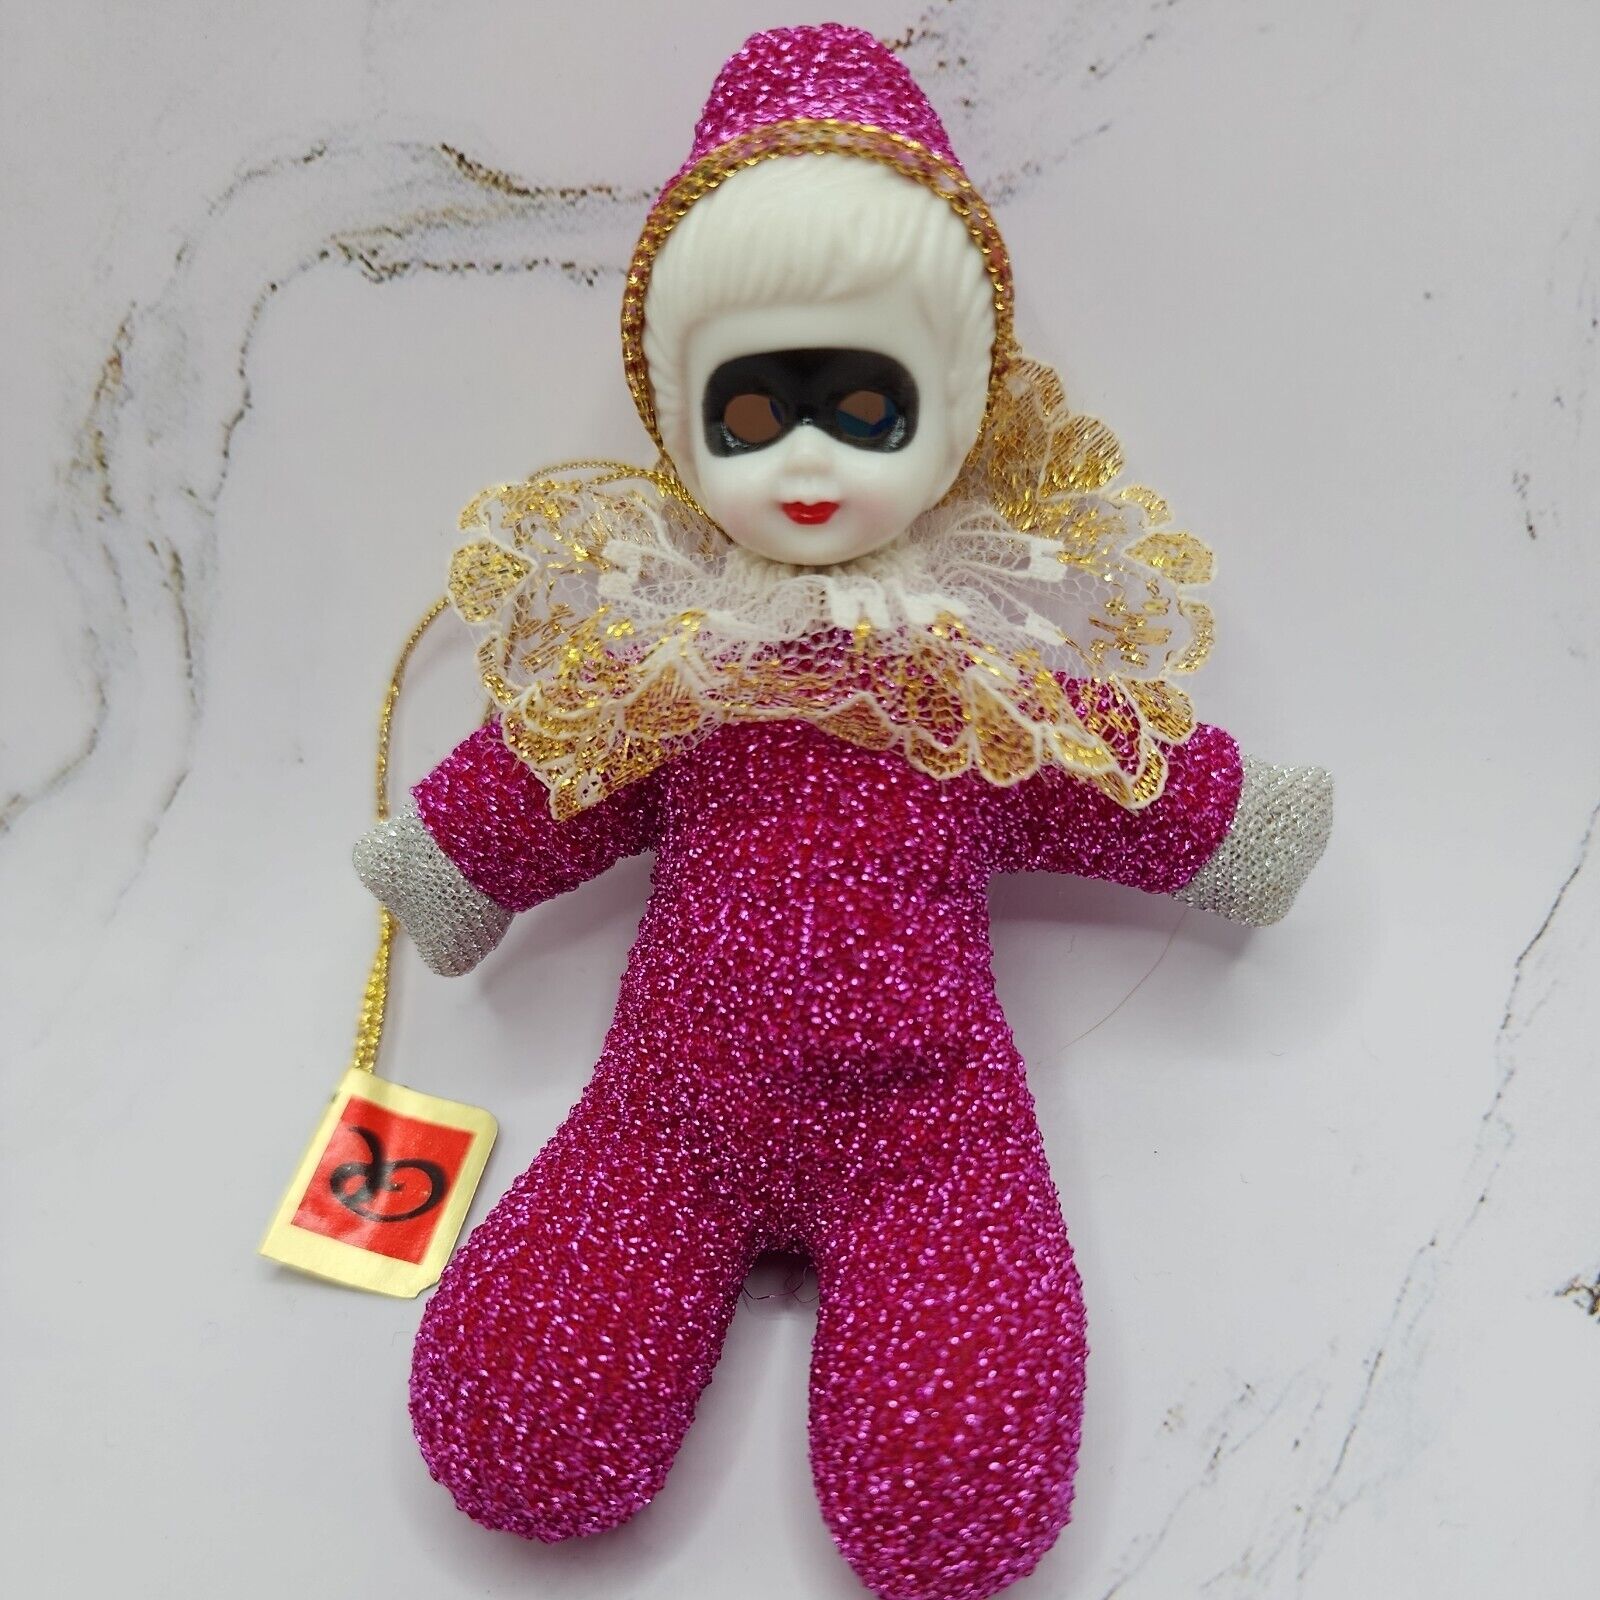 Ultra Rare 1980s Matchbox Doll Glittery Clown, with tag.